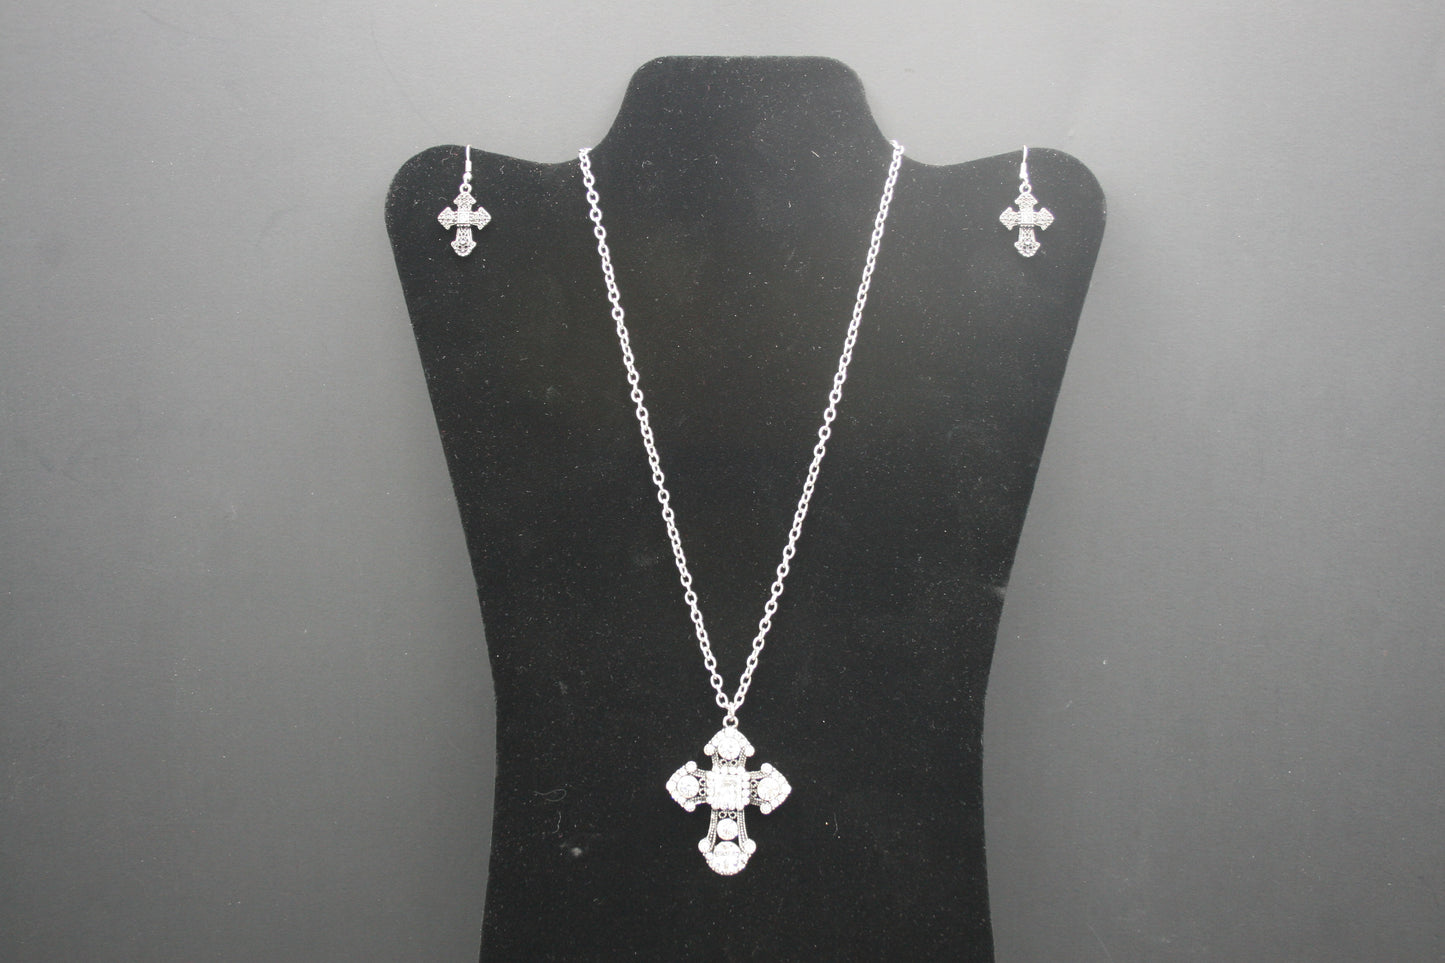 Square Rhinestone Cross Necklace and Earring Set